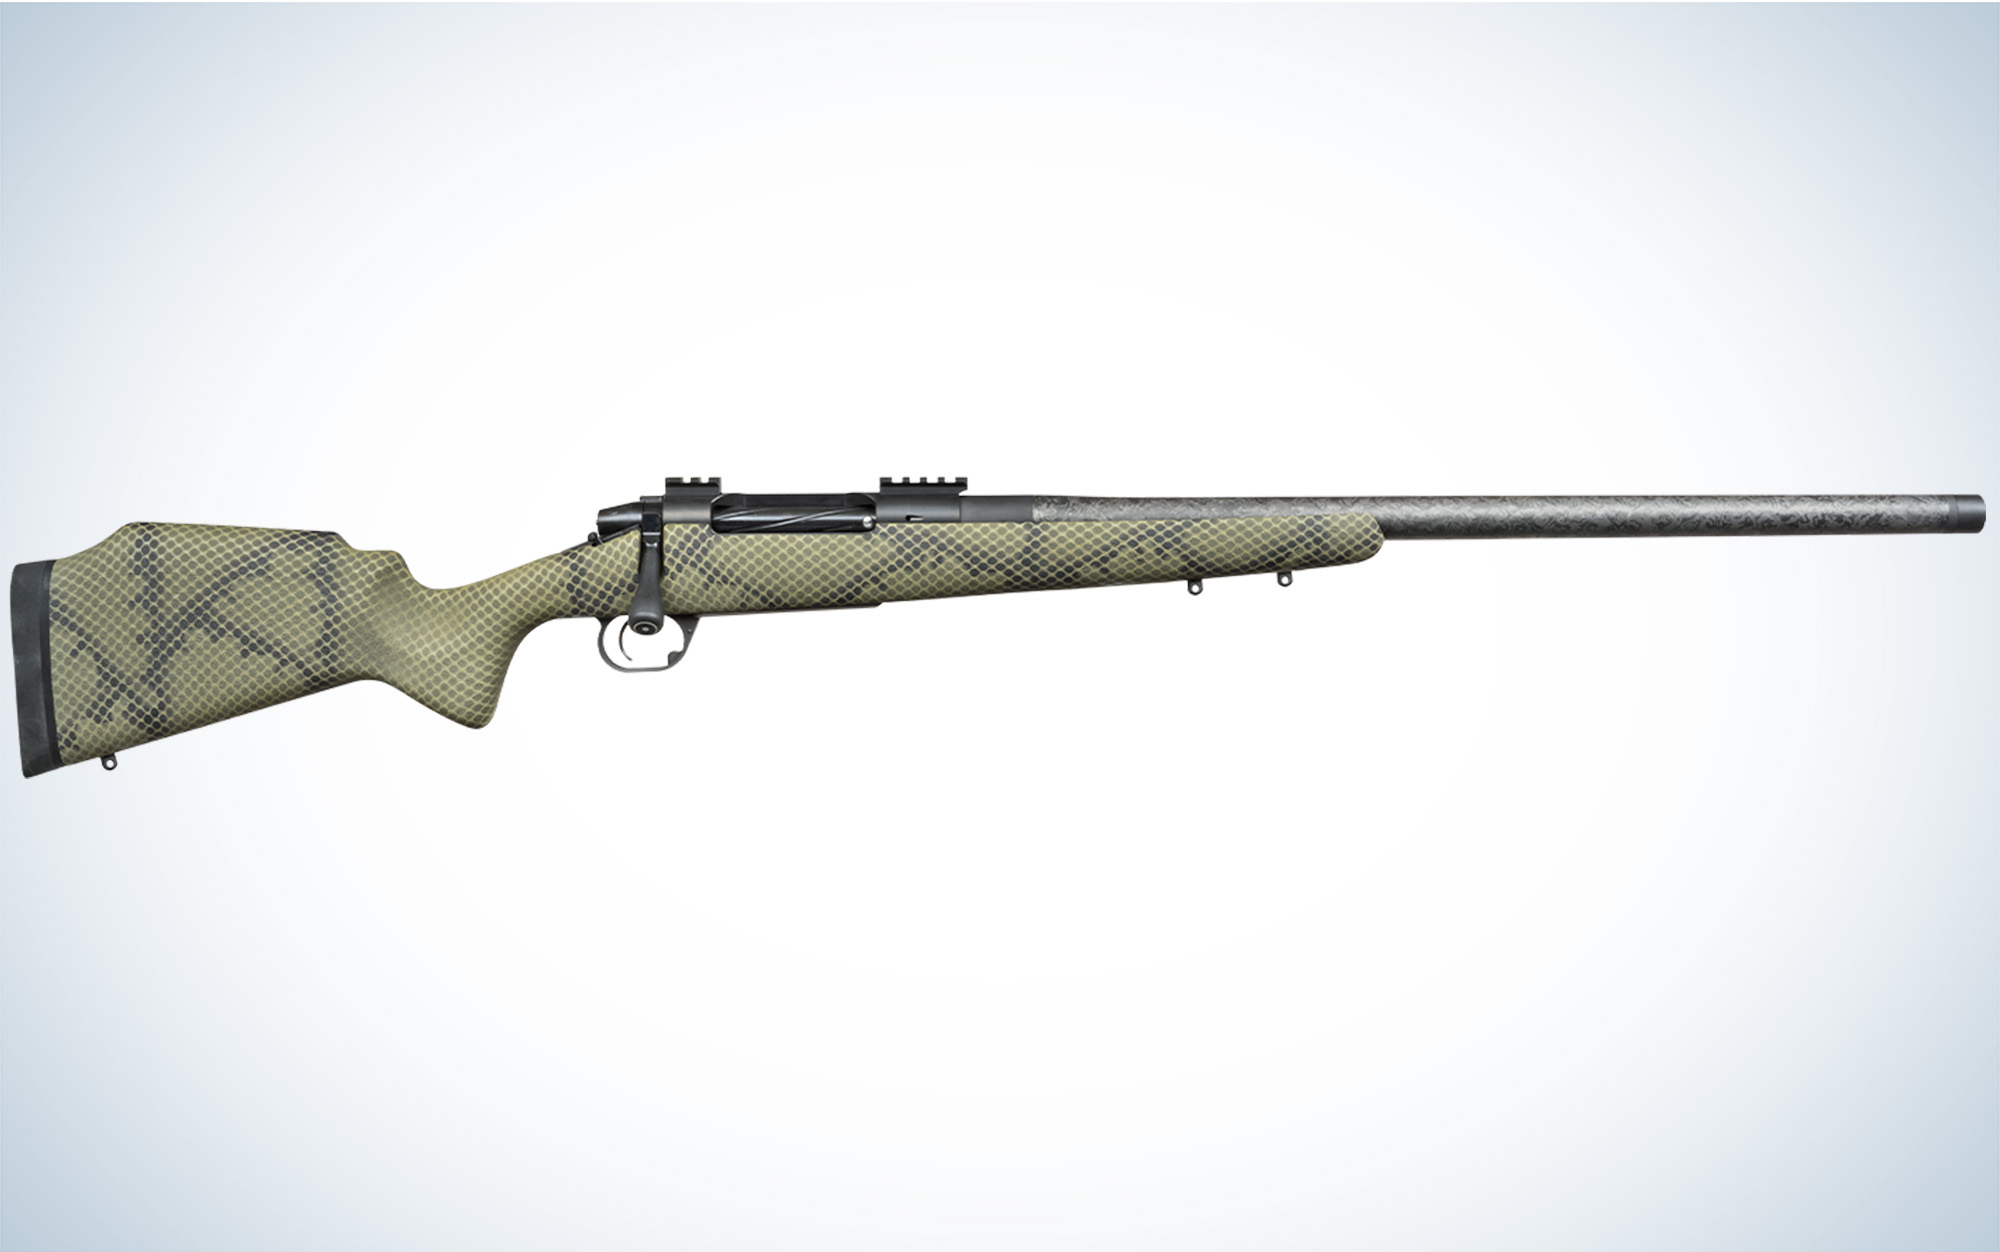 The Proof Research Ascension High Country Hunter is one of the new rifles of SHOT Show 2023.